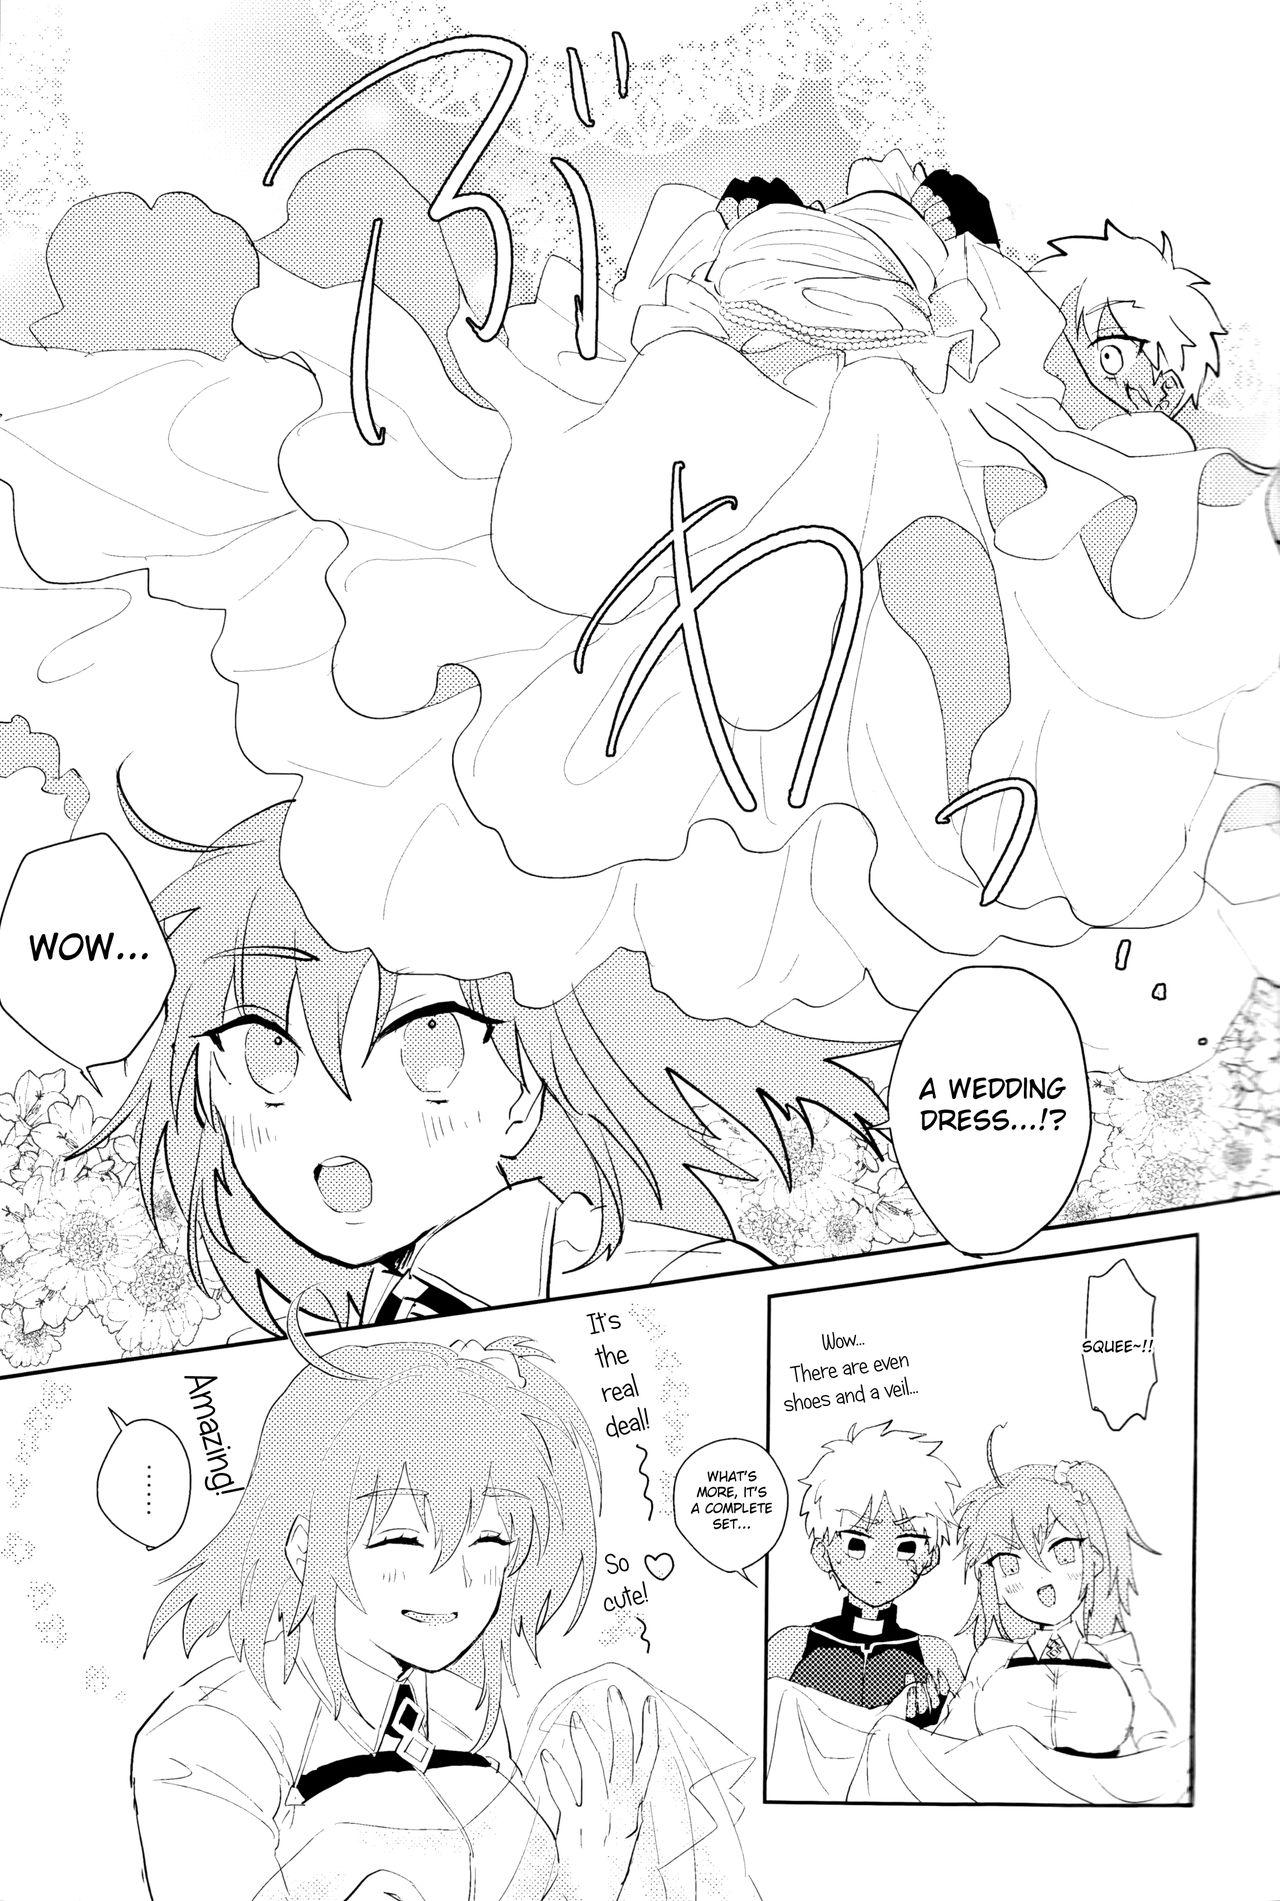 Teens Seventh Heavens Story - Fate grand order Hardsex - Page 6